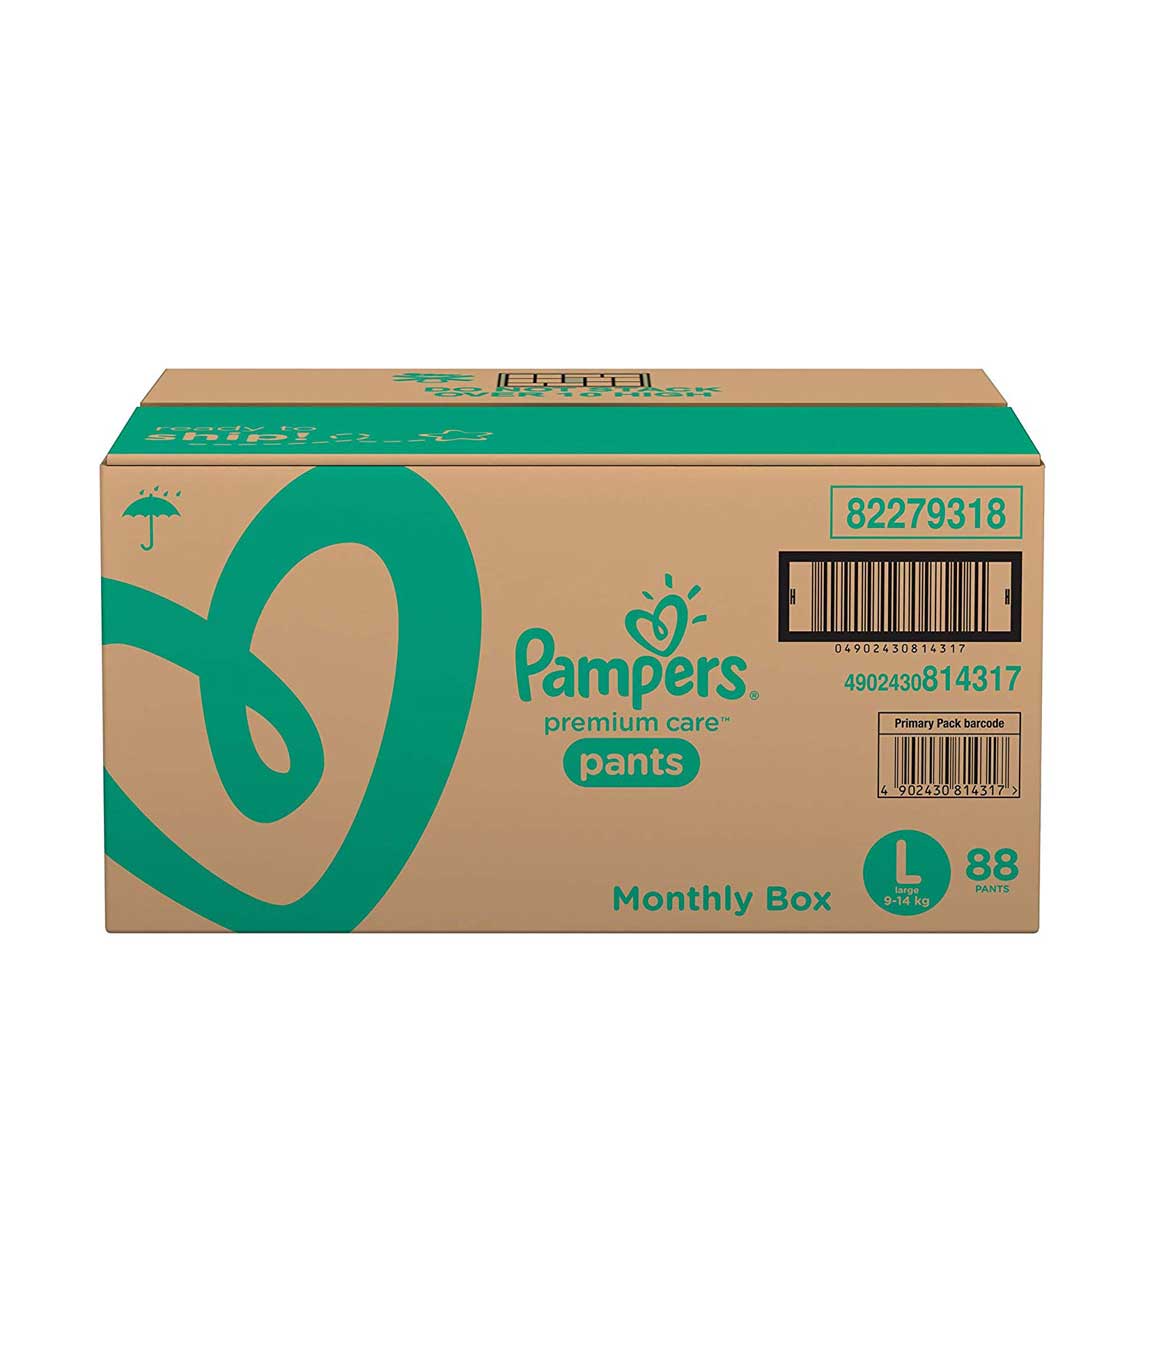 Buy Pampers Premium Care Pants Diapers Xtra Large Size 28 Pcs Online At  Best Price of Rs null - bigbasket